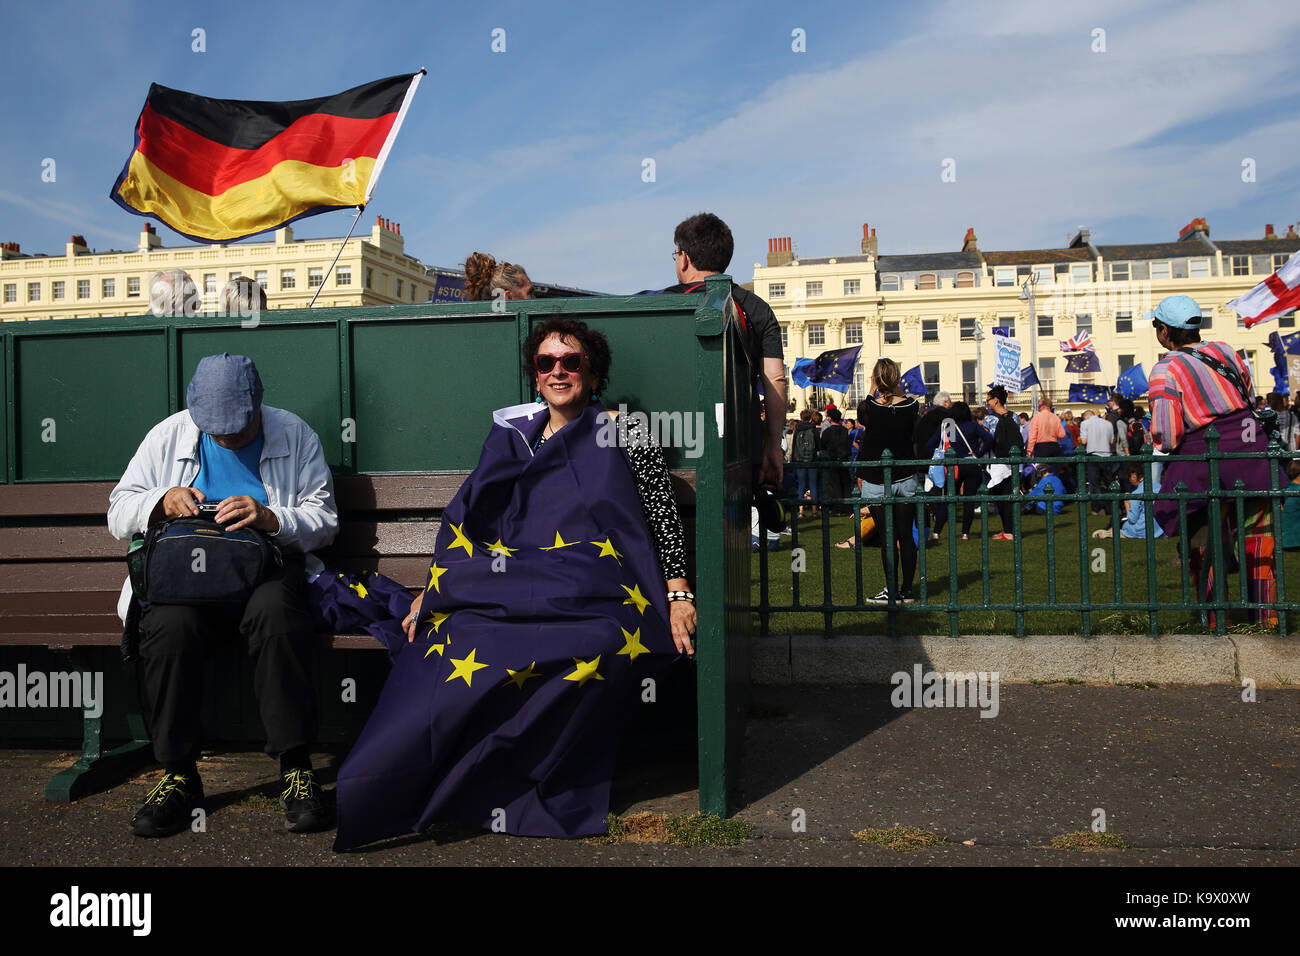 Brighton, UK. 24th September, 2017. A Pro European Union supporters sits in the sun with an EU flag 'covering her during a protest against Brexit in Brighton, UK, Sunday, September 24, 2017. Protesters rallied outside the annual Labour Party Conference being held in Brighton and attended by the opposition leader Jeremy Corbyn. Photograph : Credit: Luke MacGregor/Alamy Live News Stock Photo